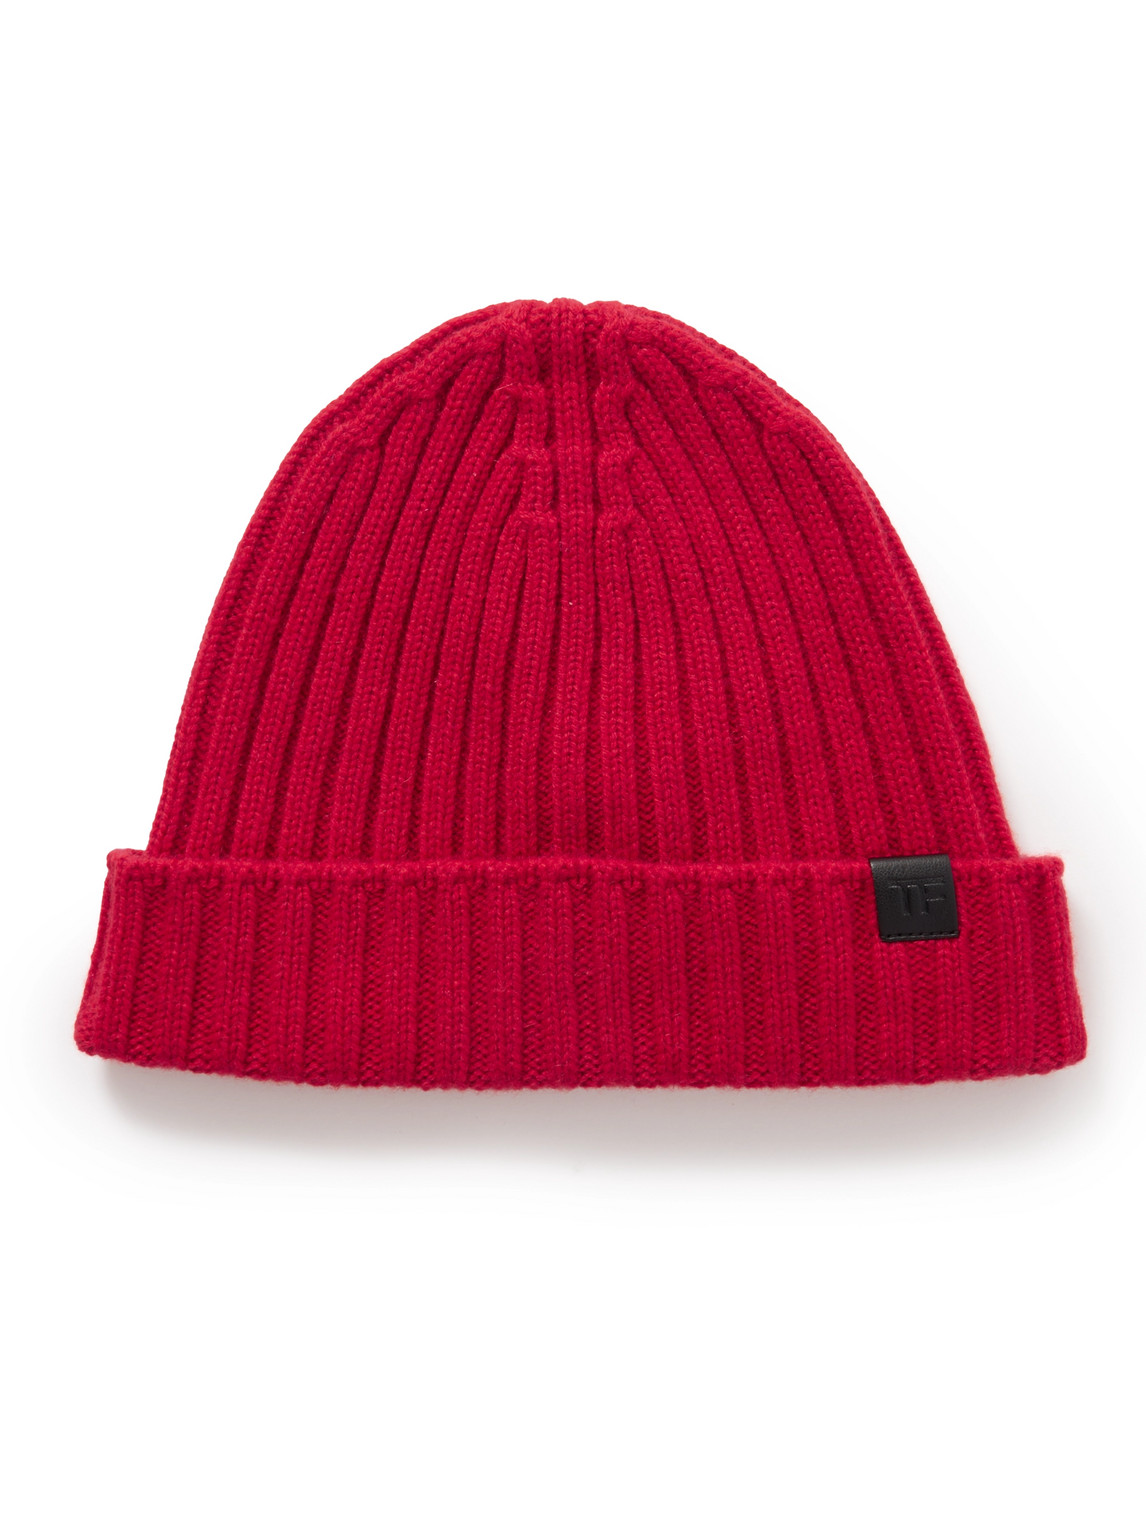 TOM FORD RIBBED CASHMERE BEANIE